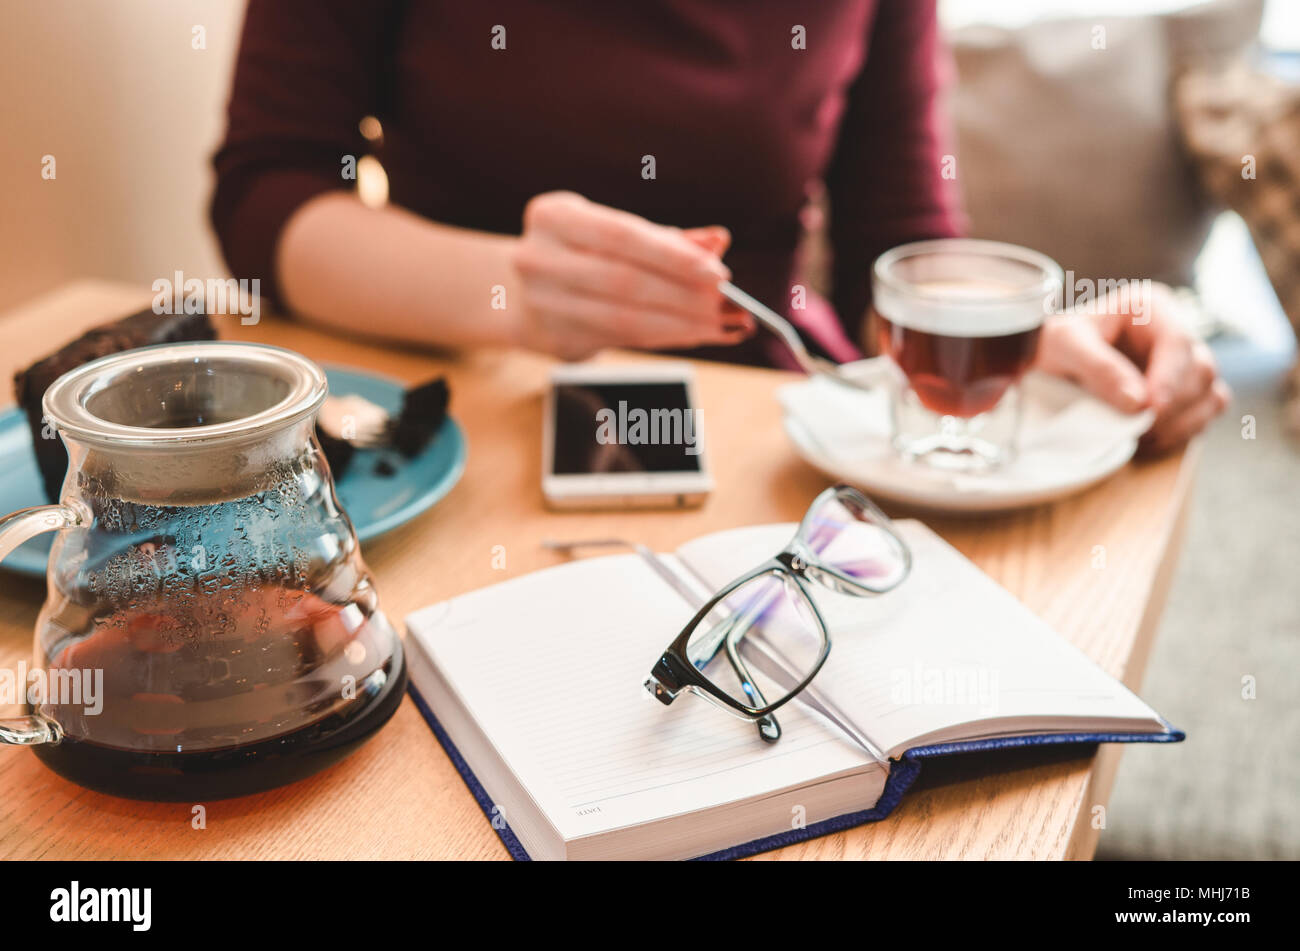 Business lunch concept. Still life: glasses, diary, smartphone and coffee.  Lifestyle soft image Stock Photo